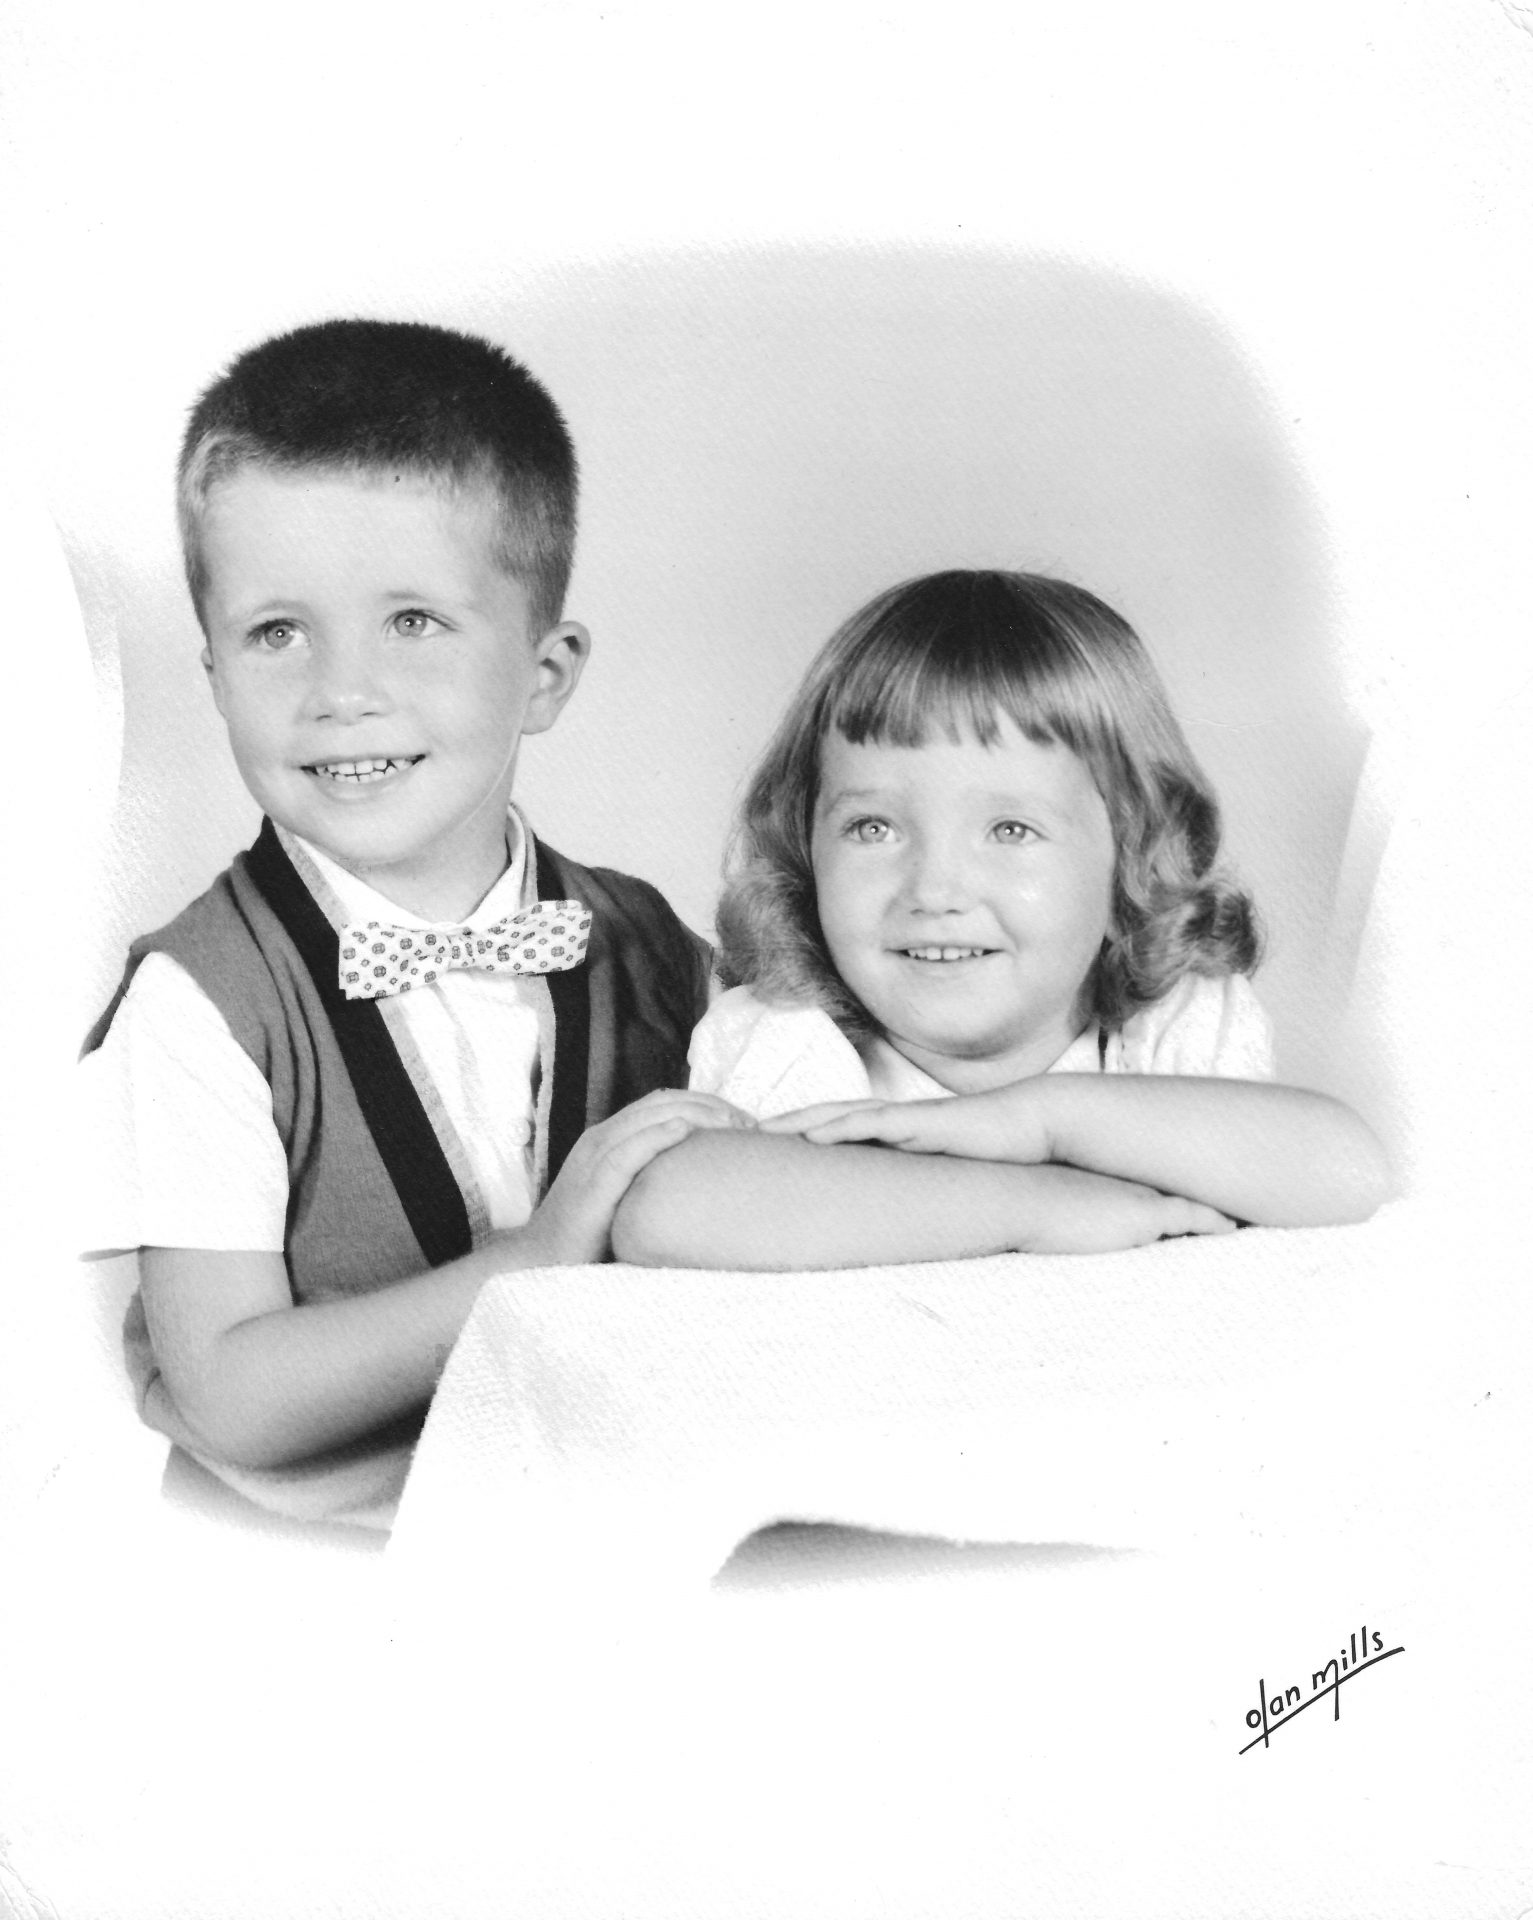 Butch and sister Pam as children